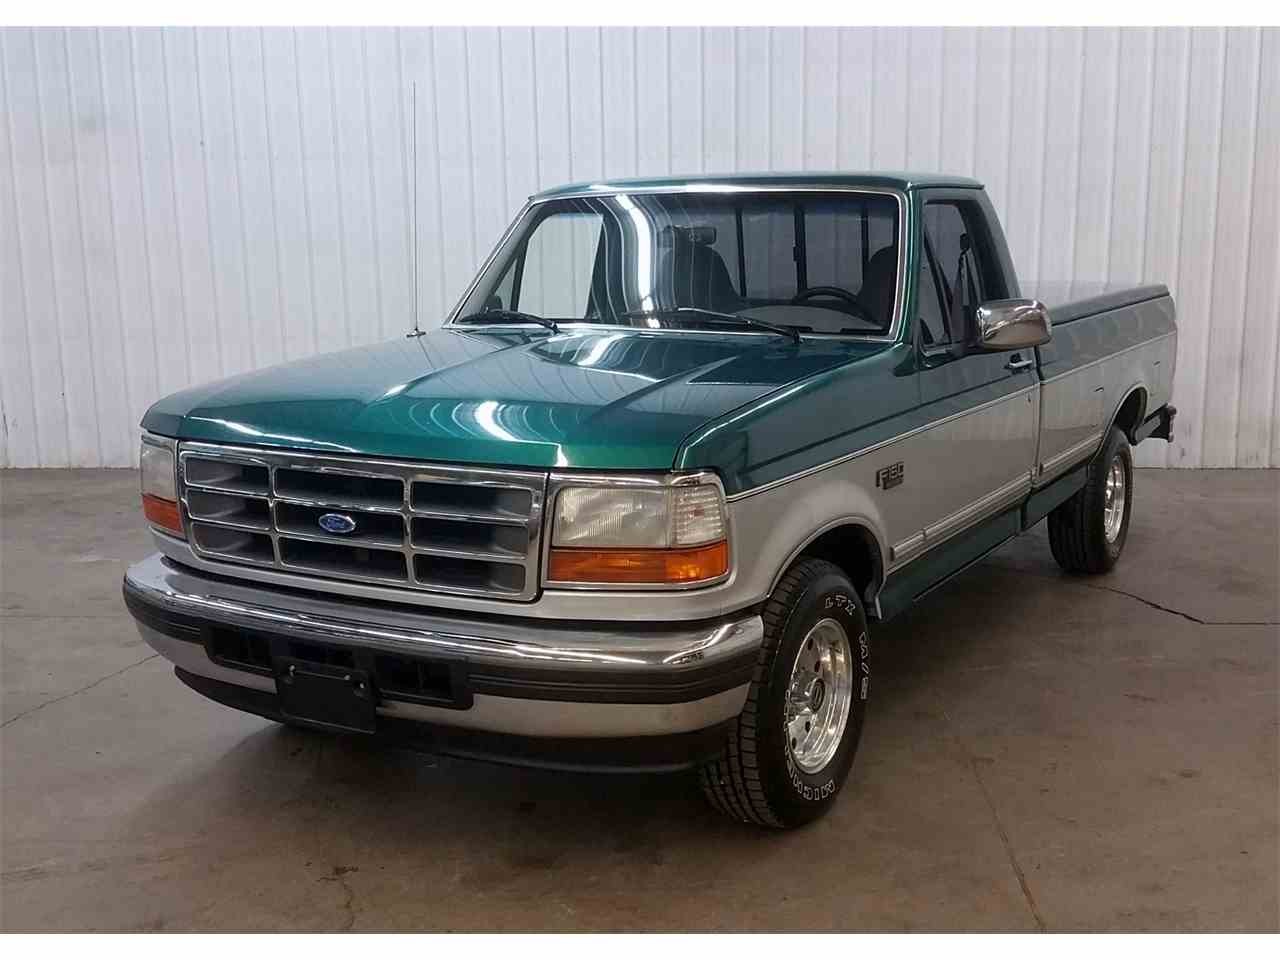 1996 FORD F-150